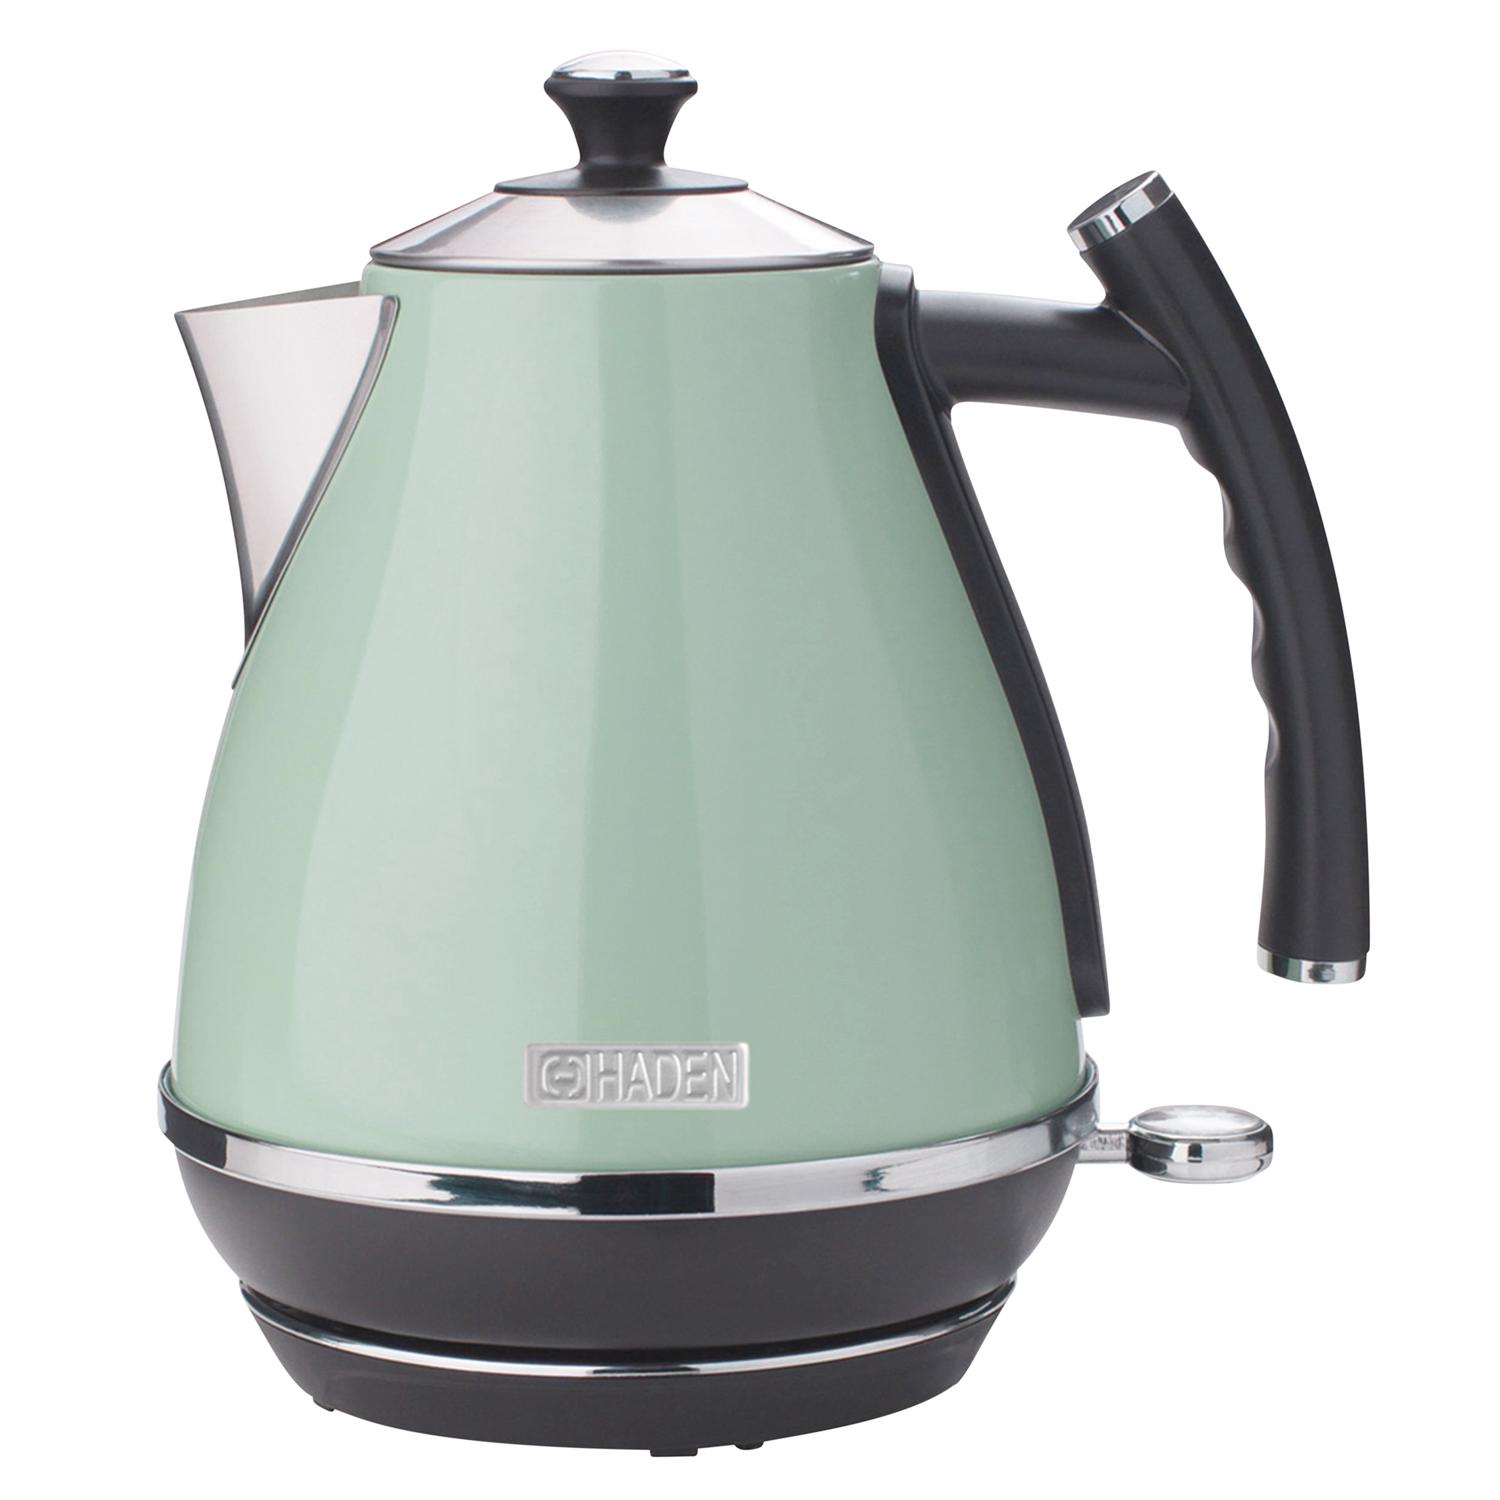 Photos - Electric Kettle Haden Cotswold Green Retro Stainless Steel 1.7 L Electric Tea Kettle 75008 